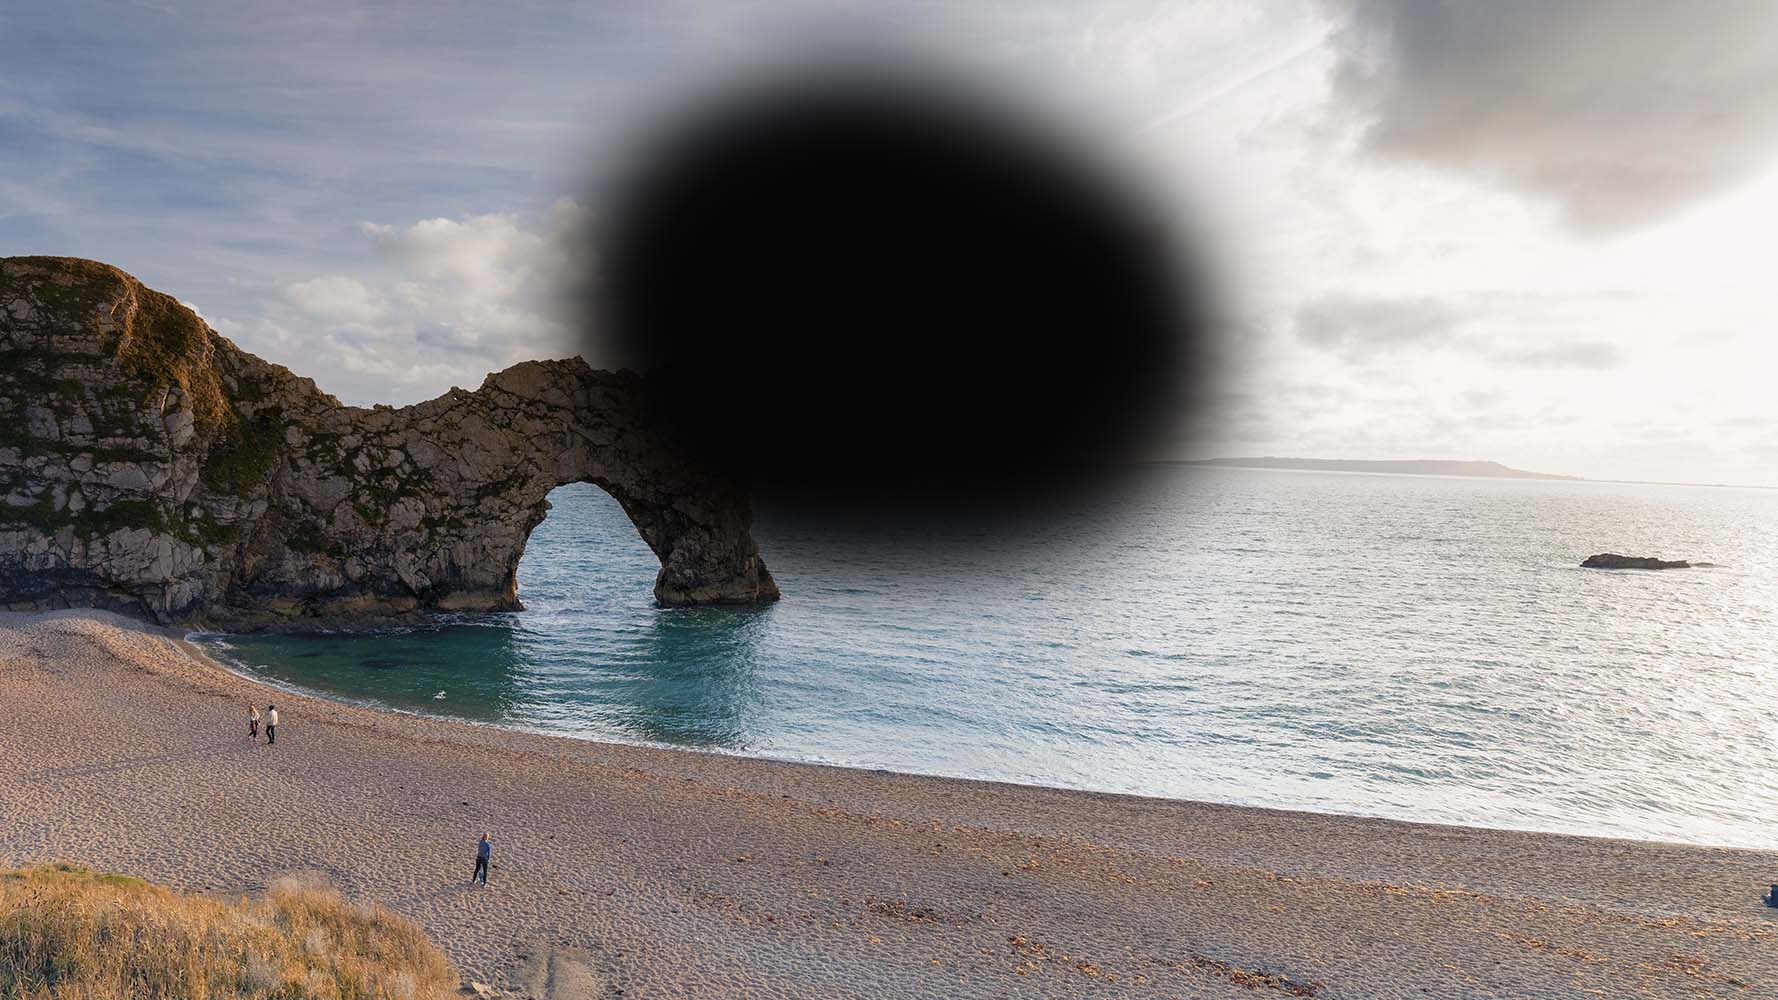 How someone with AMD might experience a view of Durdle Door - a large, blurred black shape covers the central part of the scene